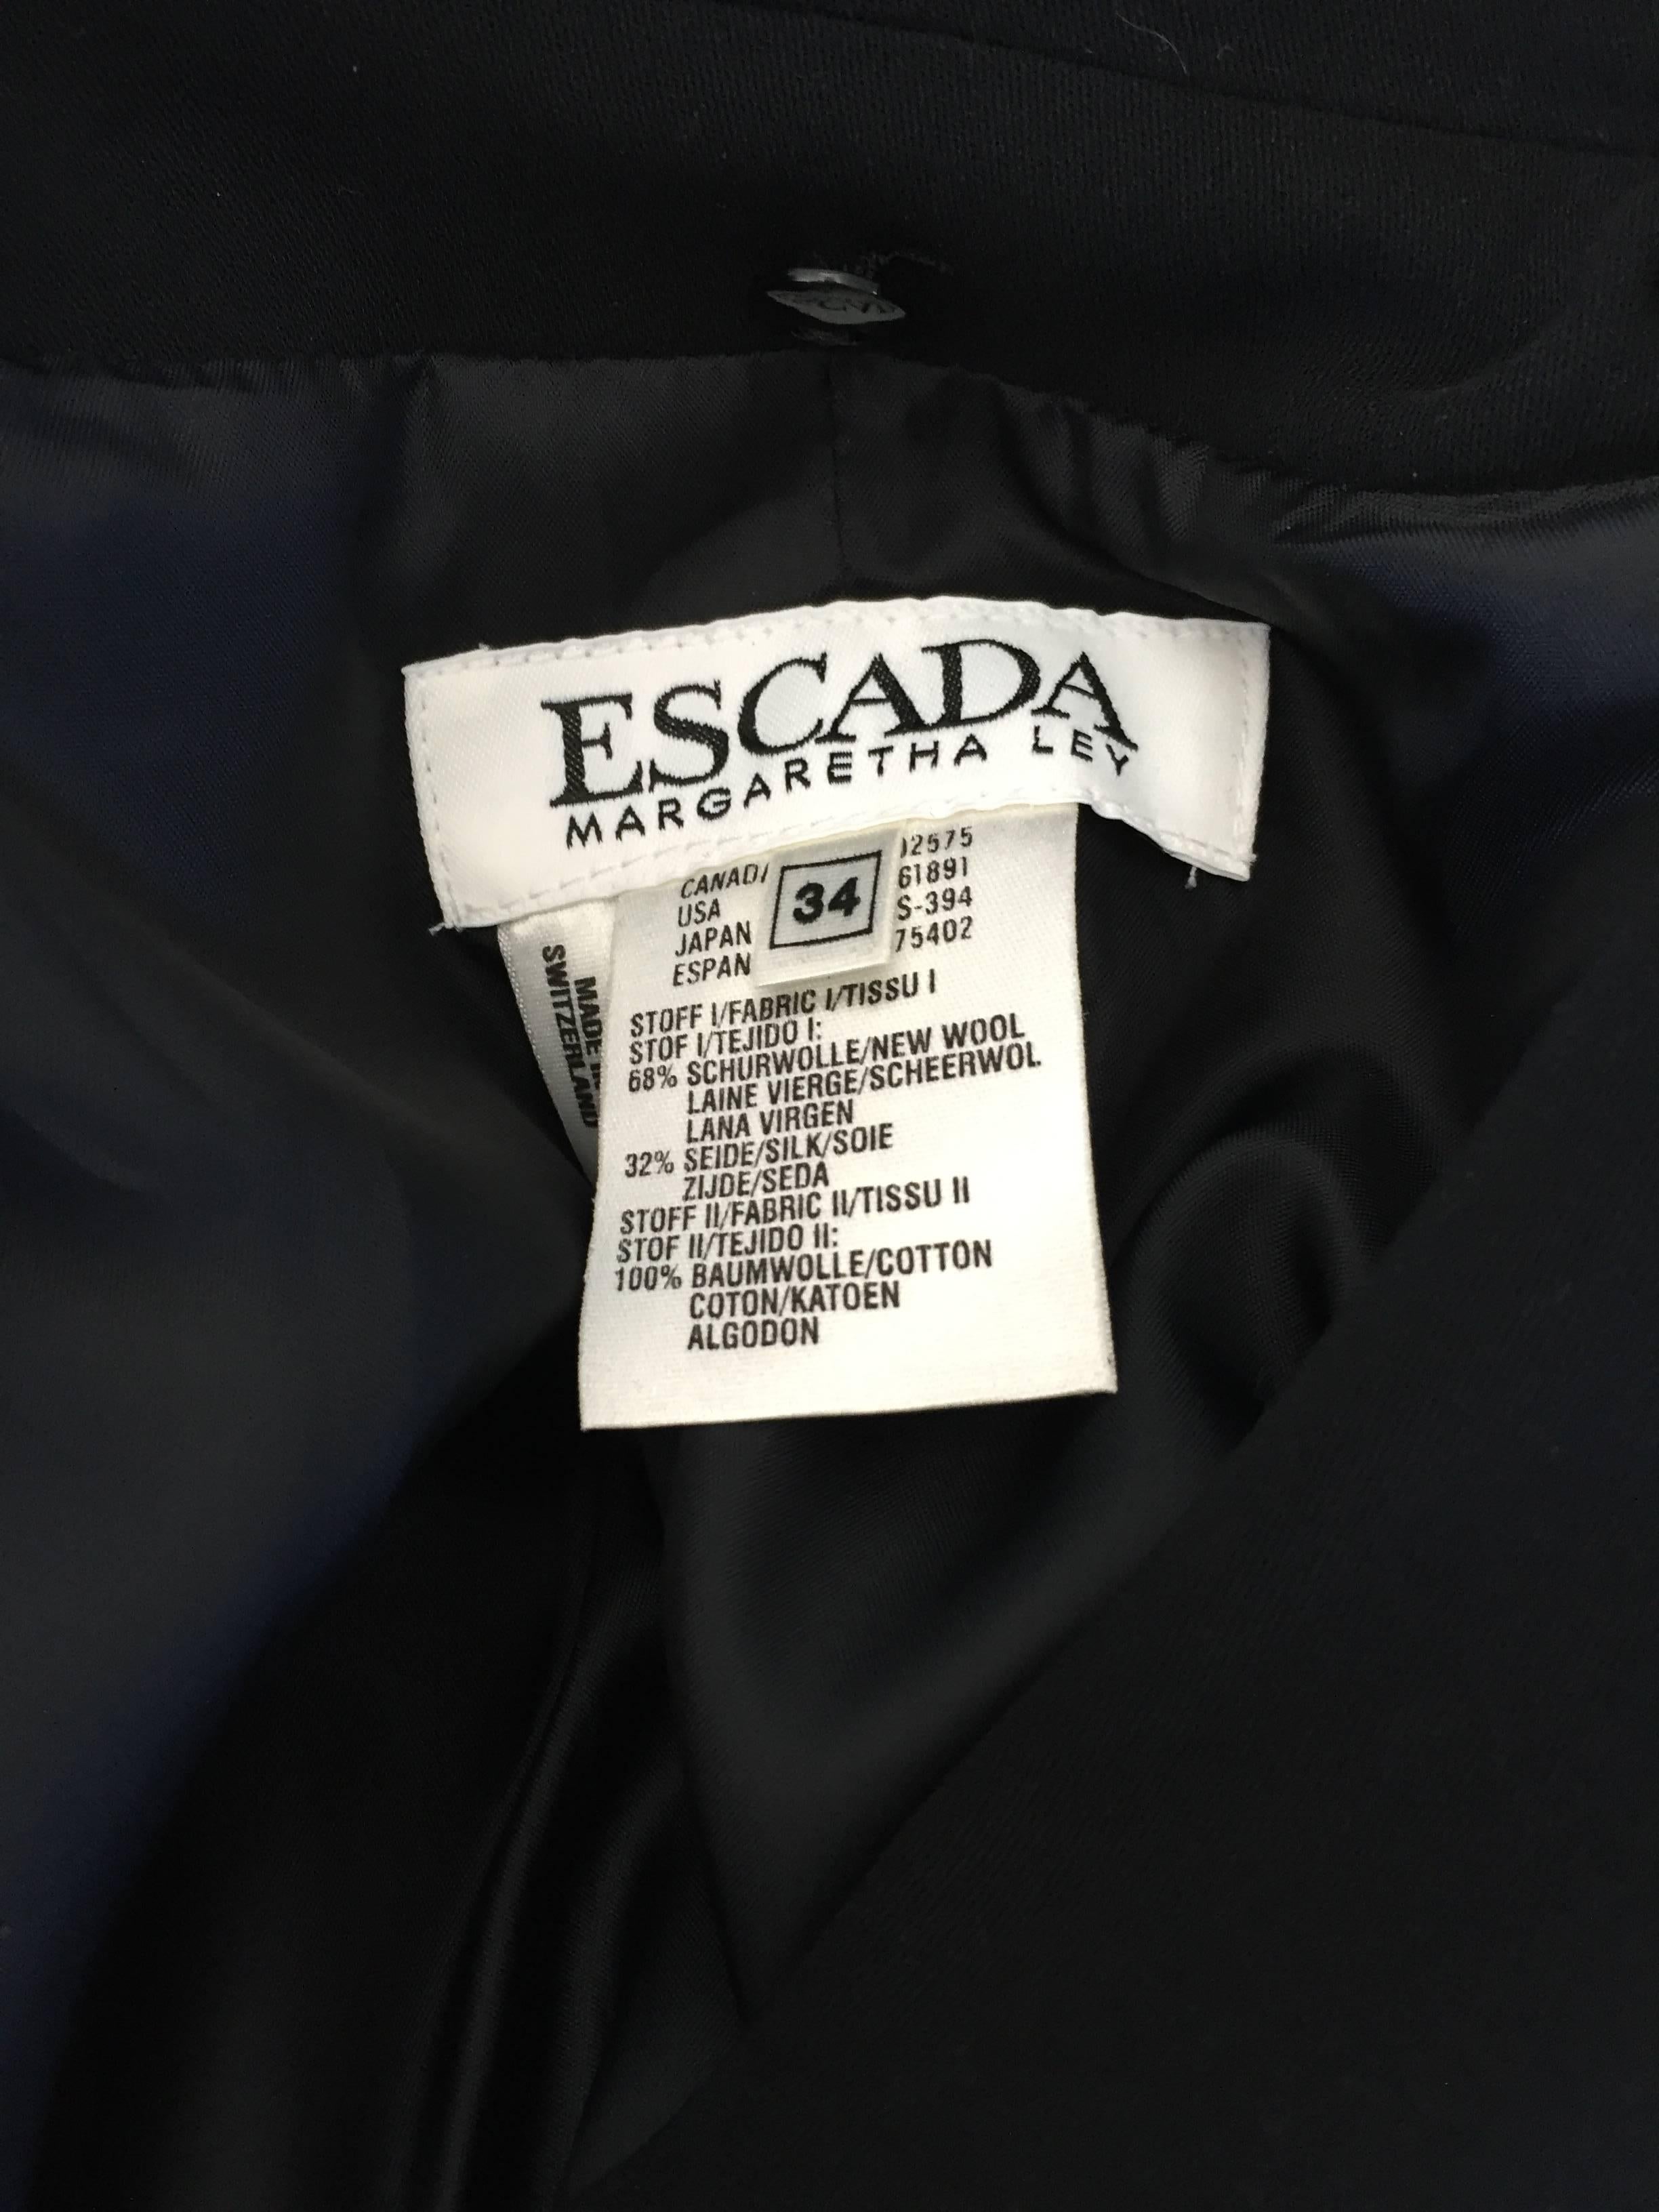 Vintage Escada Margaretha Ley Black and White ' Piano ' Dress Removable Collar For Sale 3